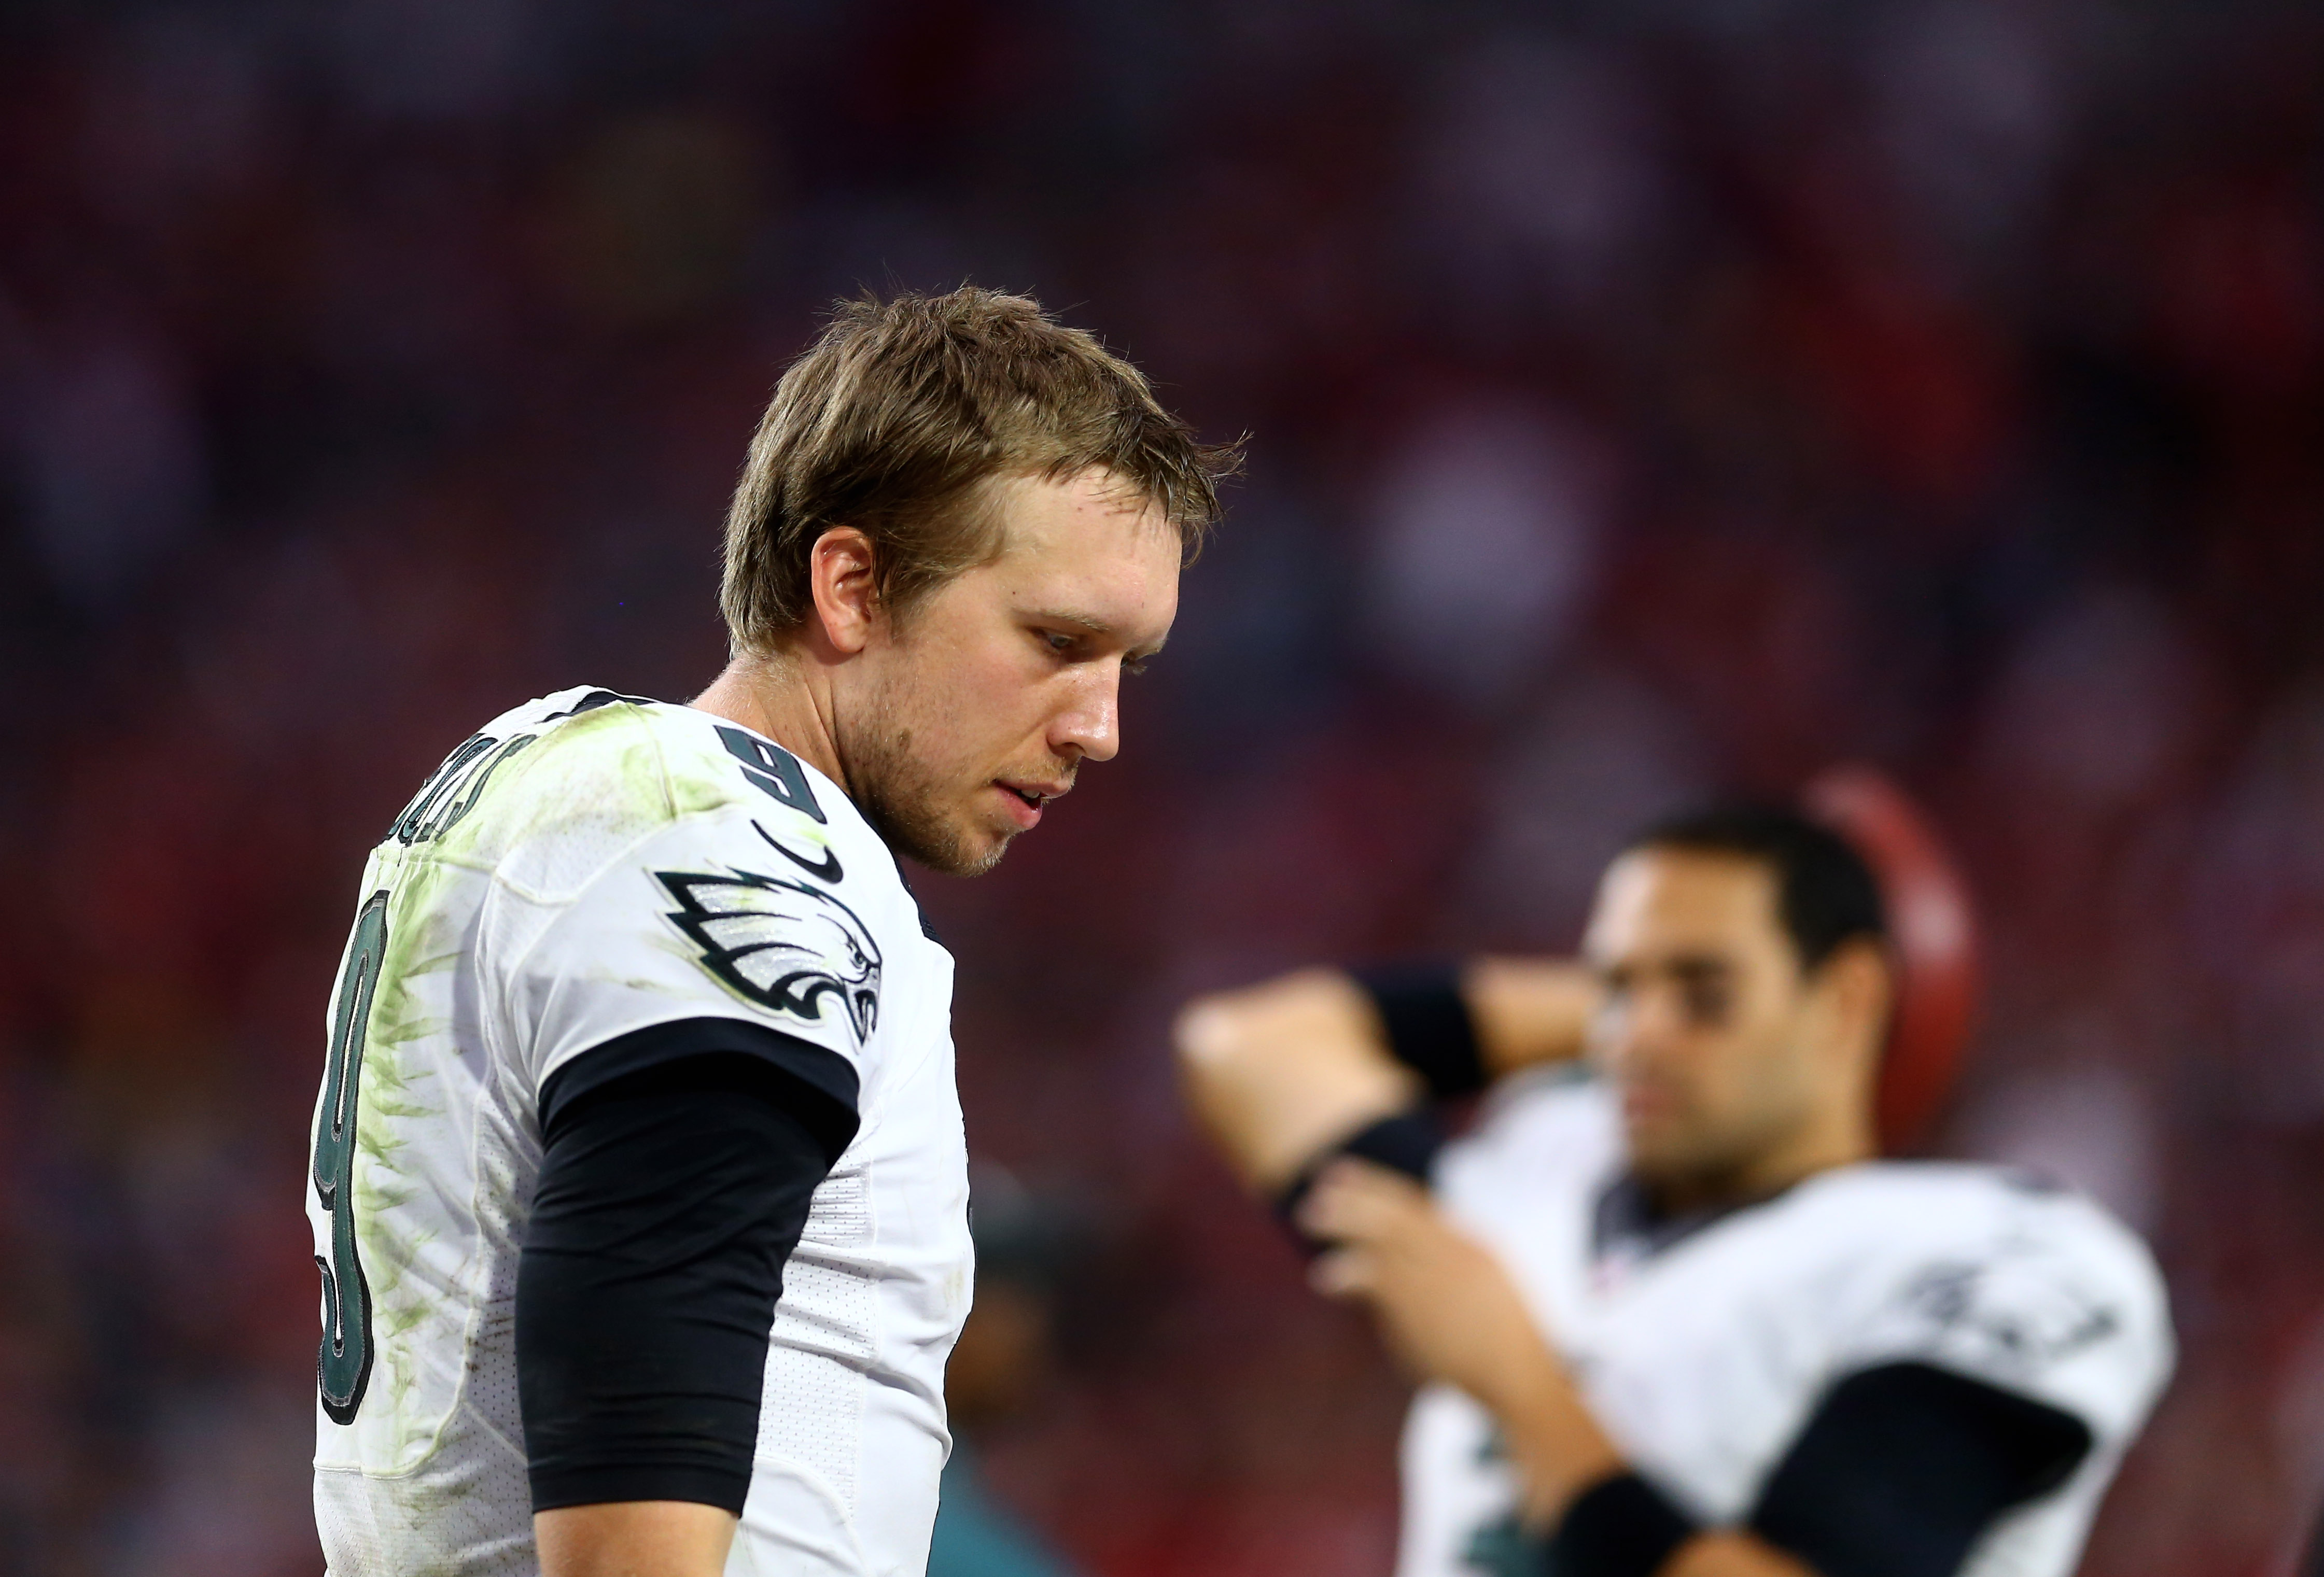 Both Foles and Sanchez had problems protecting the football in 2014. (Mark J. Rebilas-USA TODAY Sports)